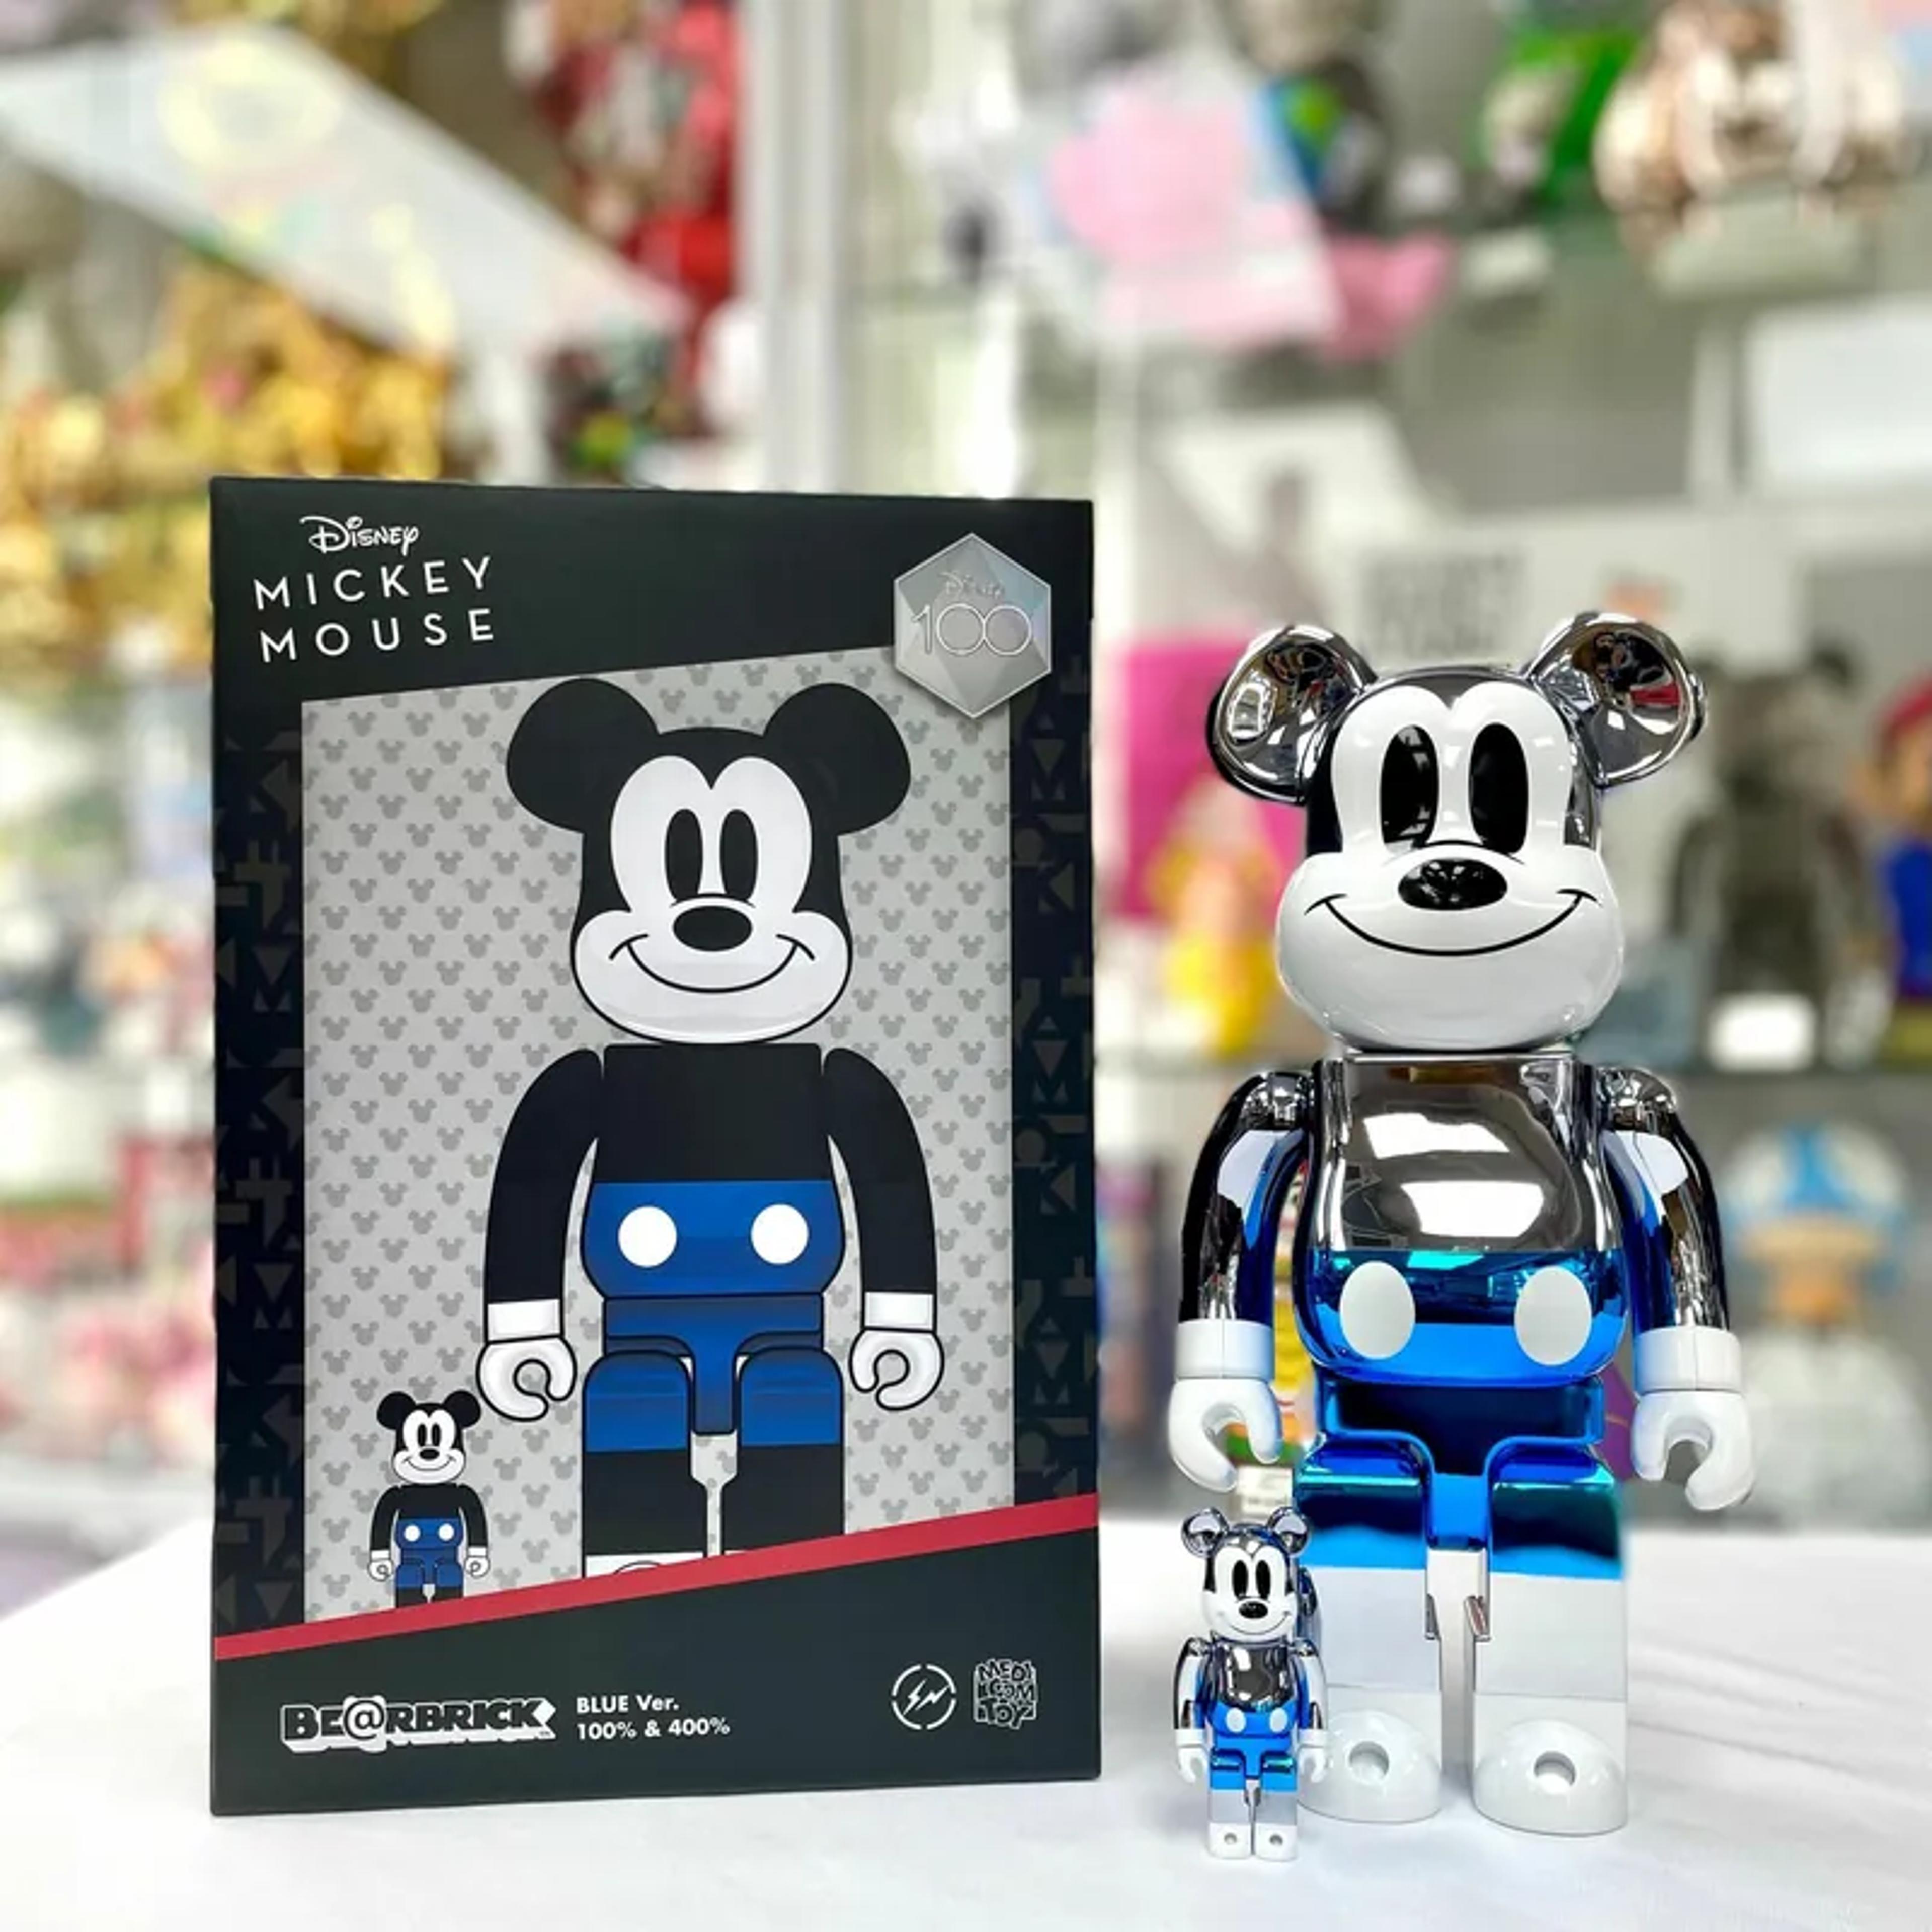 [Free shipping] BE@RBRICK Fragmentdesign MICKEY MOUSE BLUE Ver.